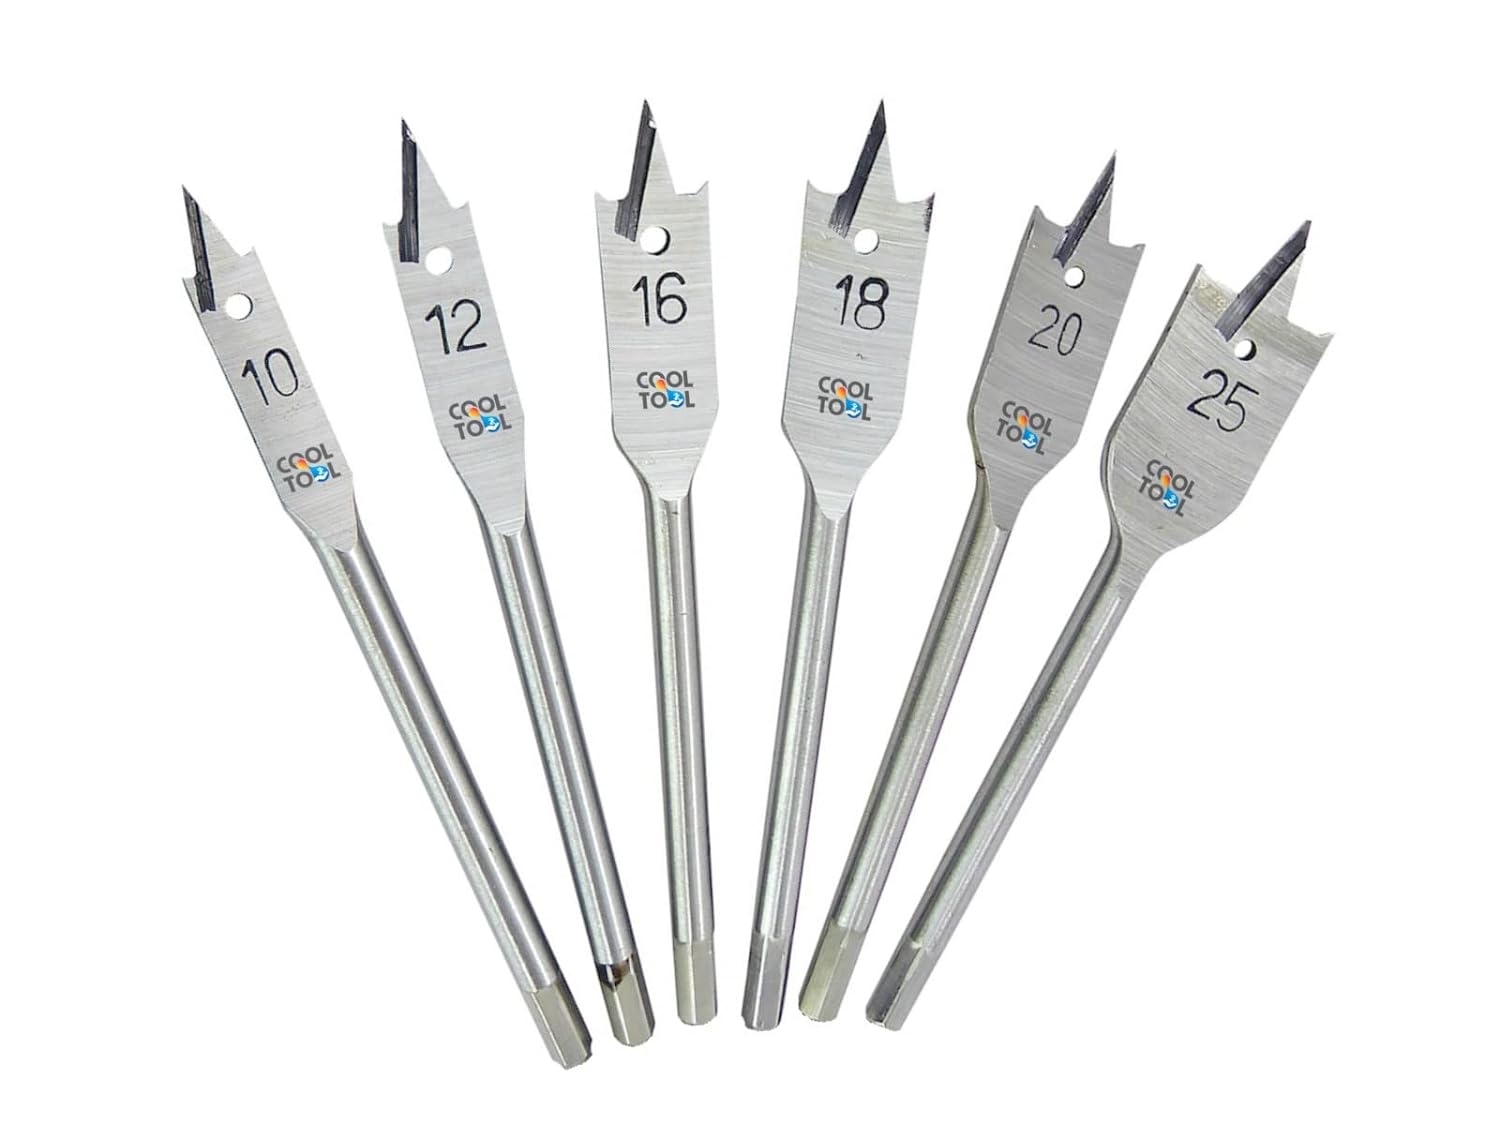 6 Pieces Hex Drill Bits set For Spade Boring In Wood, Plastic(10, 12, 16, 18, 20, 25 mm), Heat Treated High-Carbon Steel